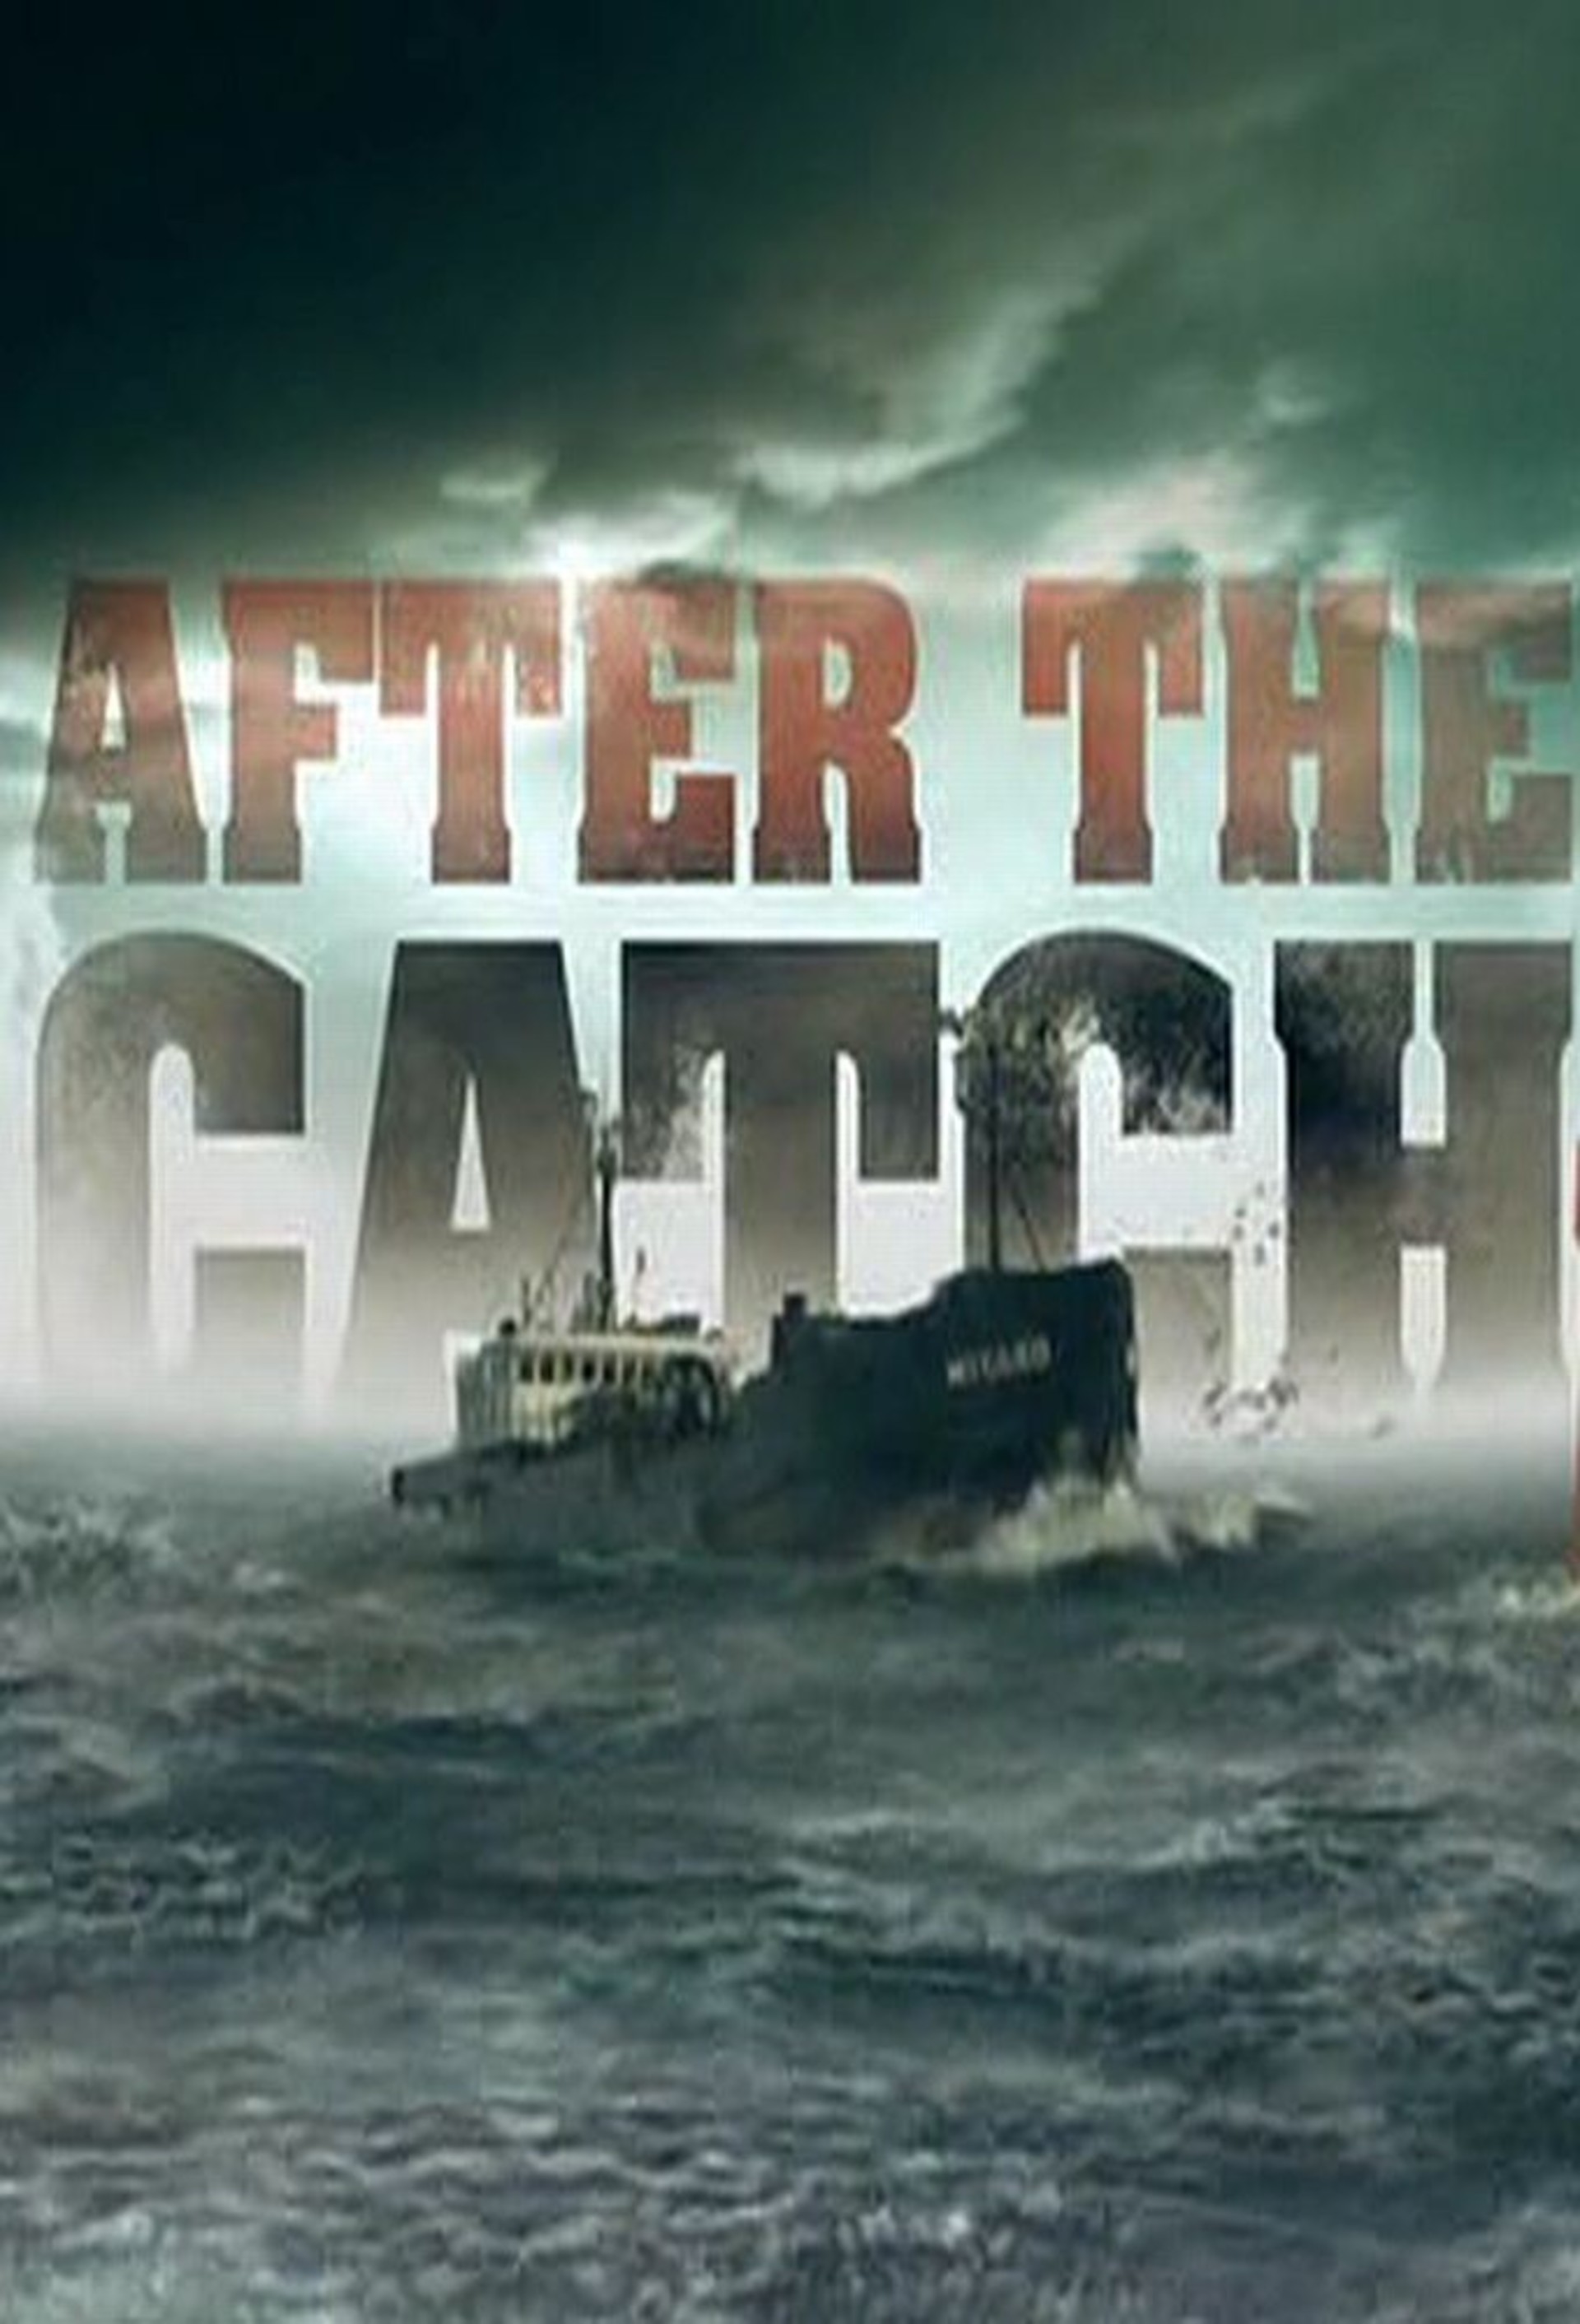 After The Catch: Season 1